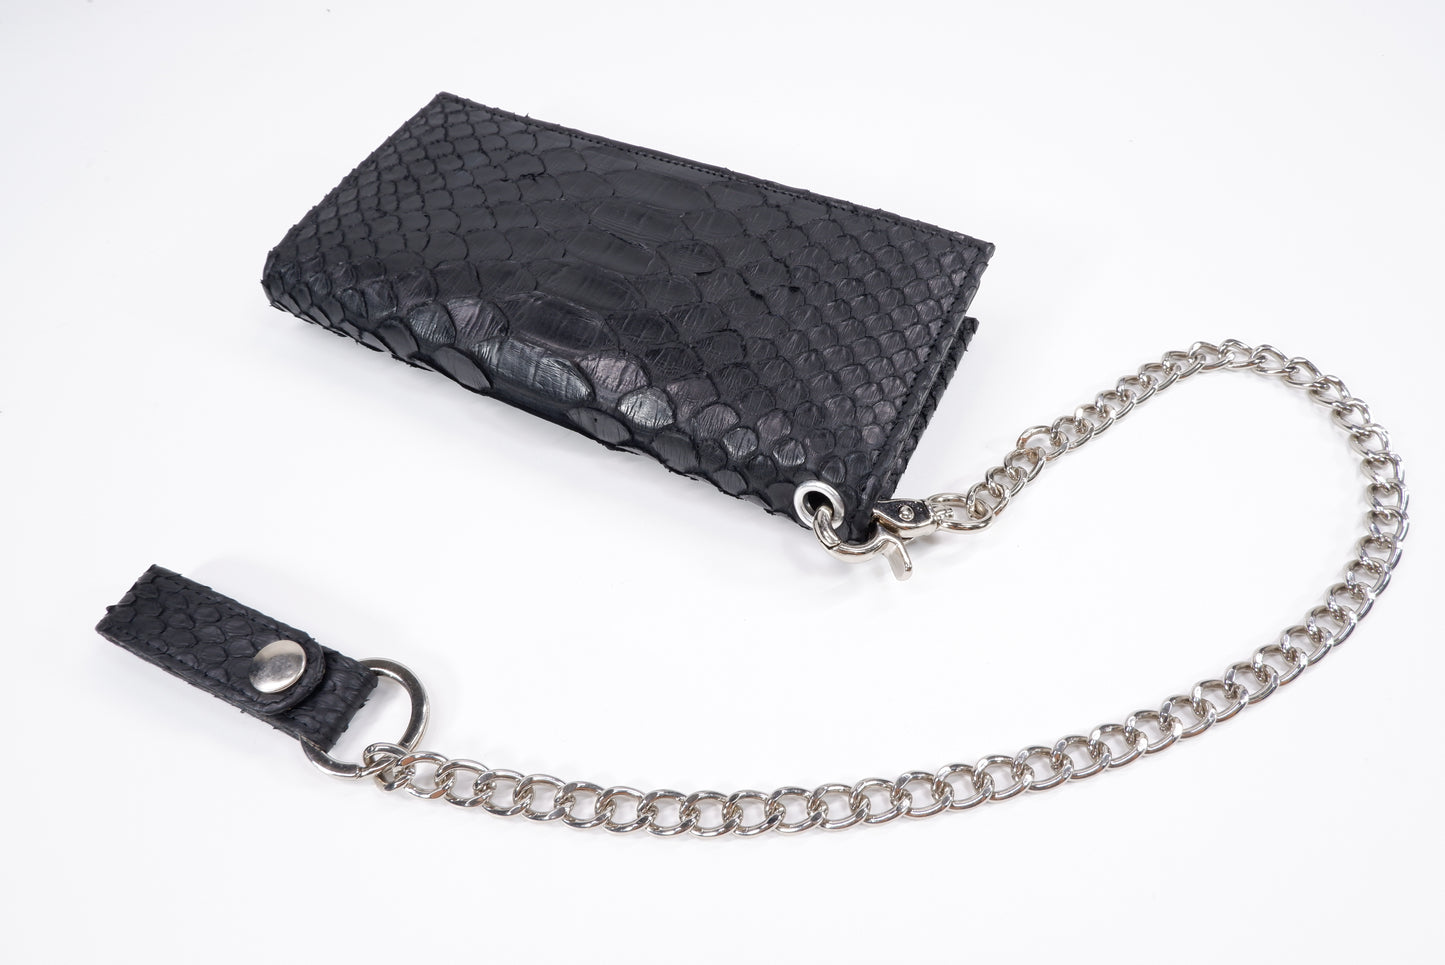 Genuine Python Belly Snake Skin Leather Long Checkbook Wallet with Chains